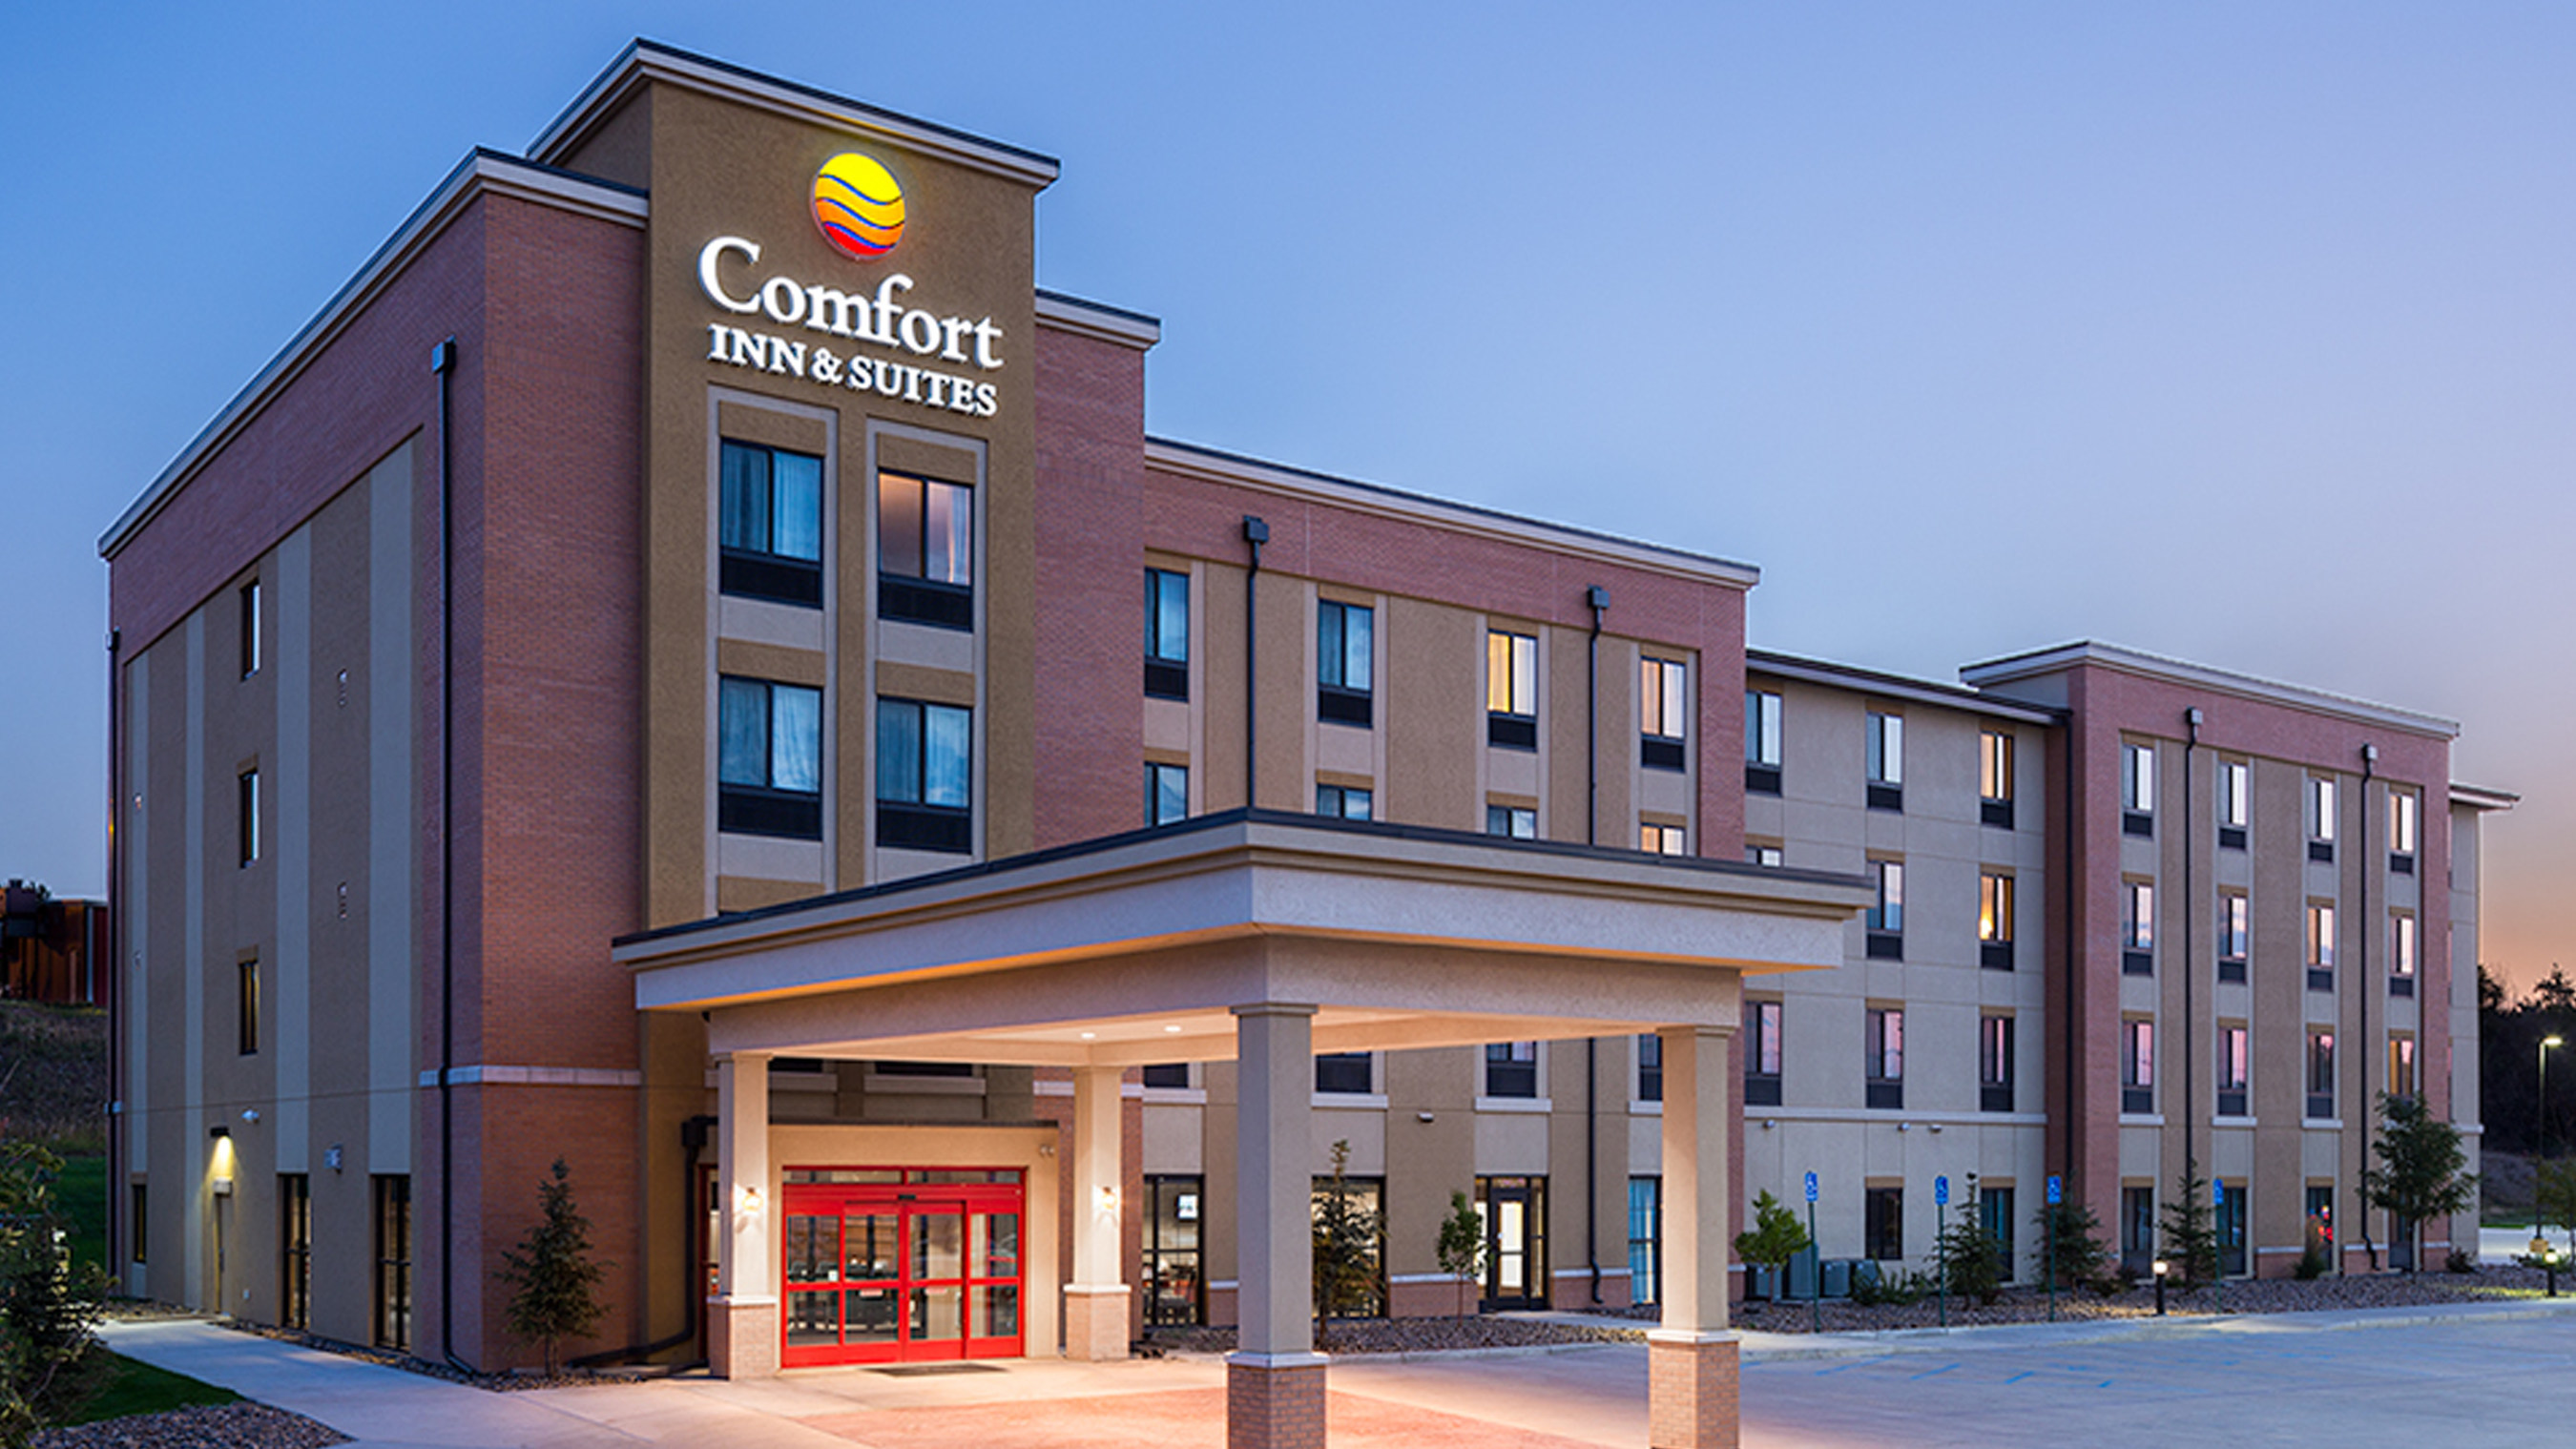 Comfort Hotel Brand Successfully Opens More Than One Hotel Per Week in 2017  - Jan 17, 2018